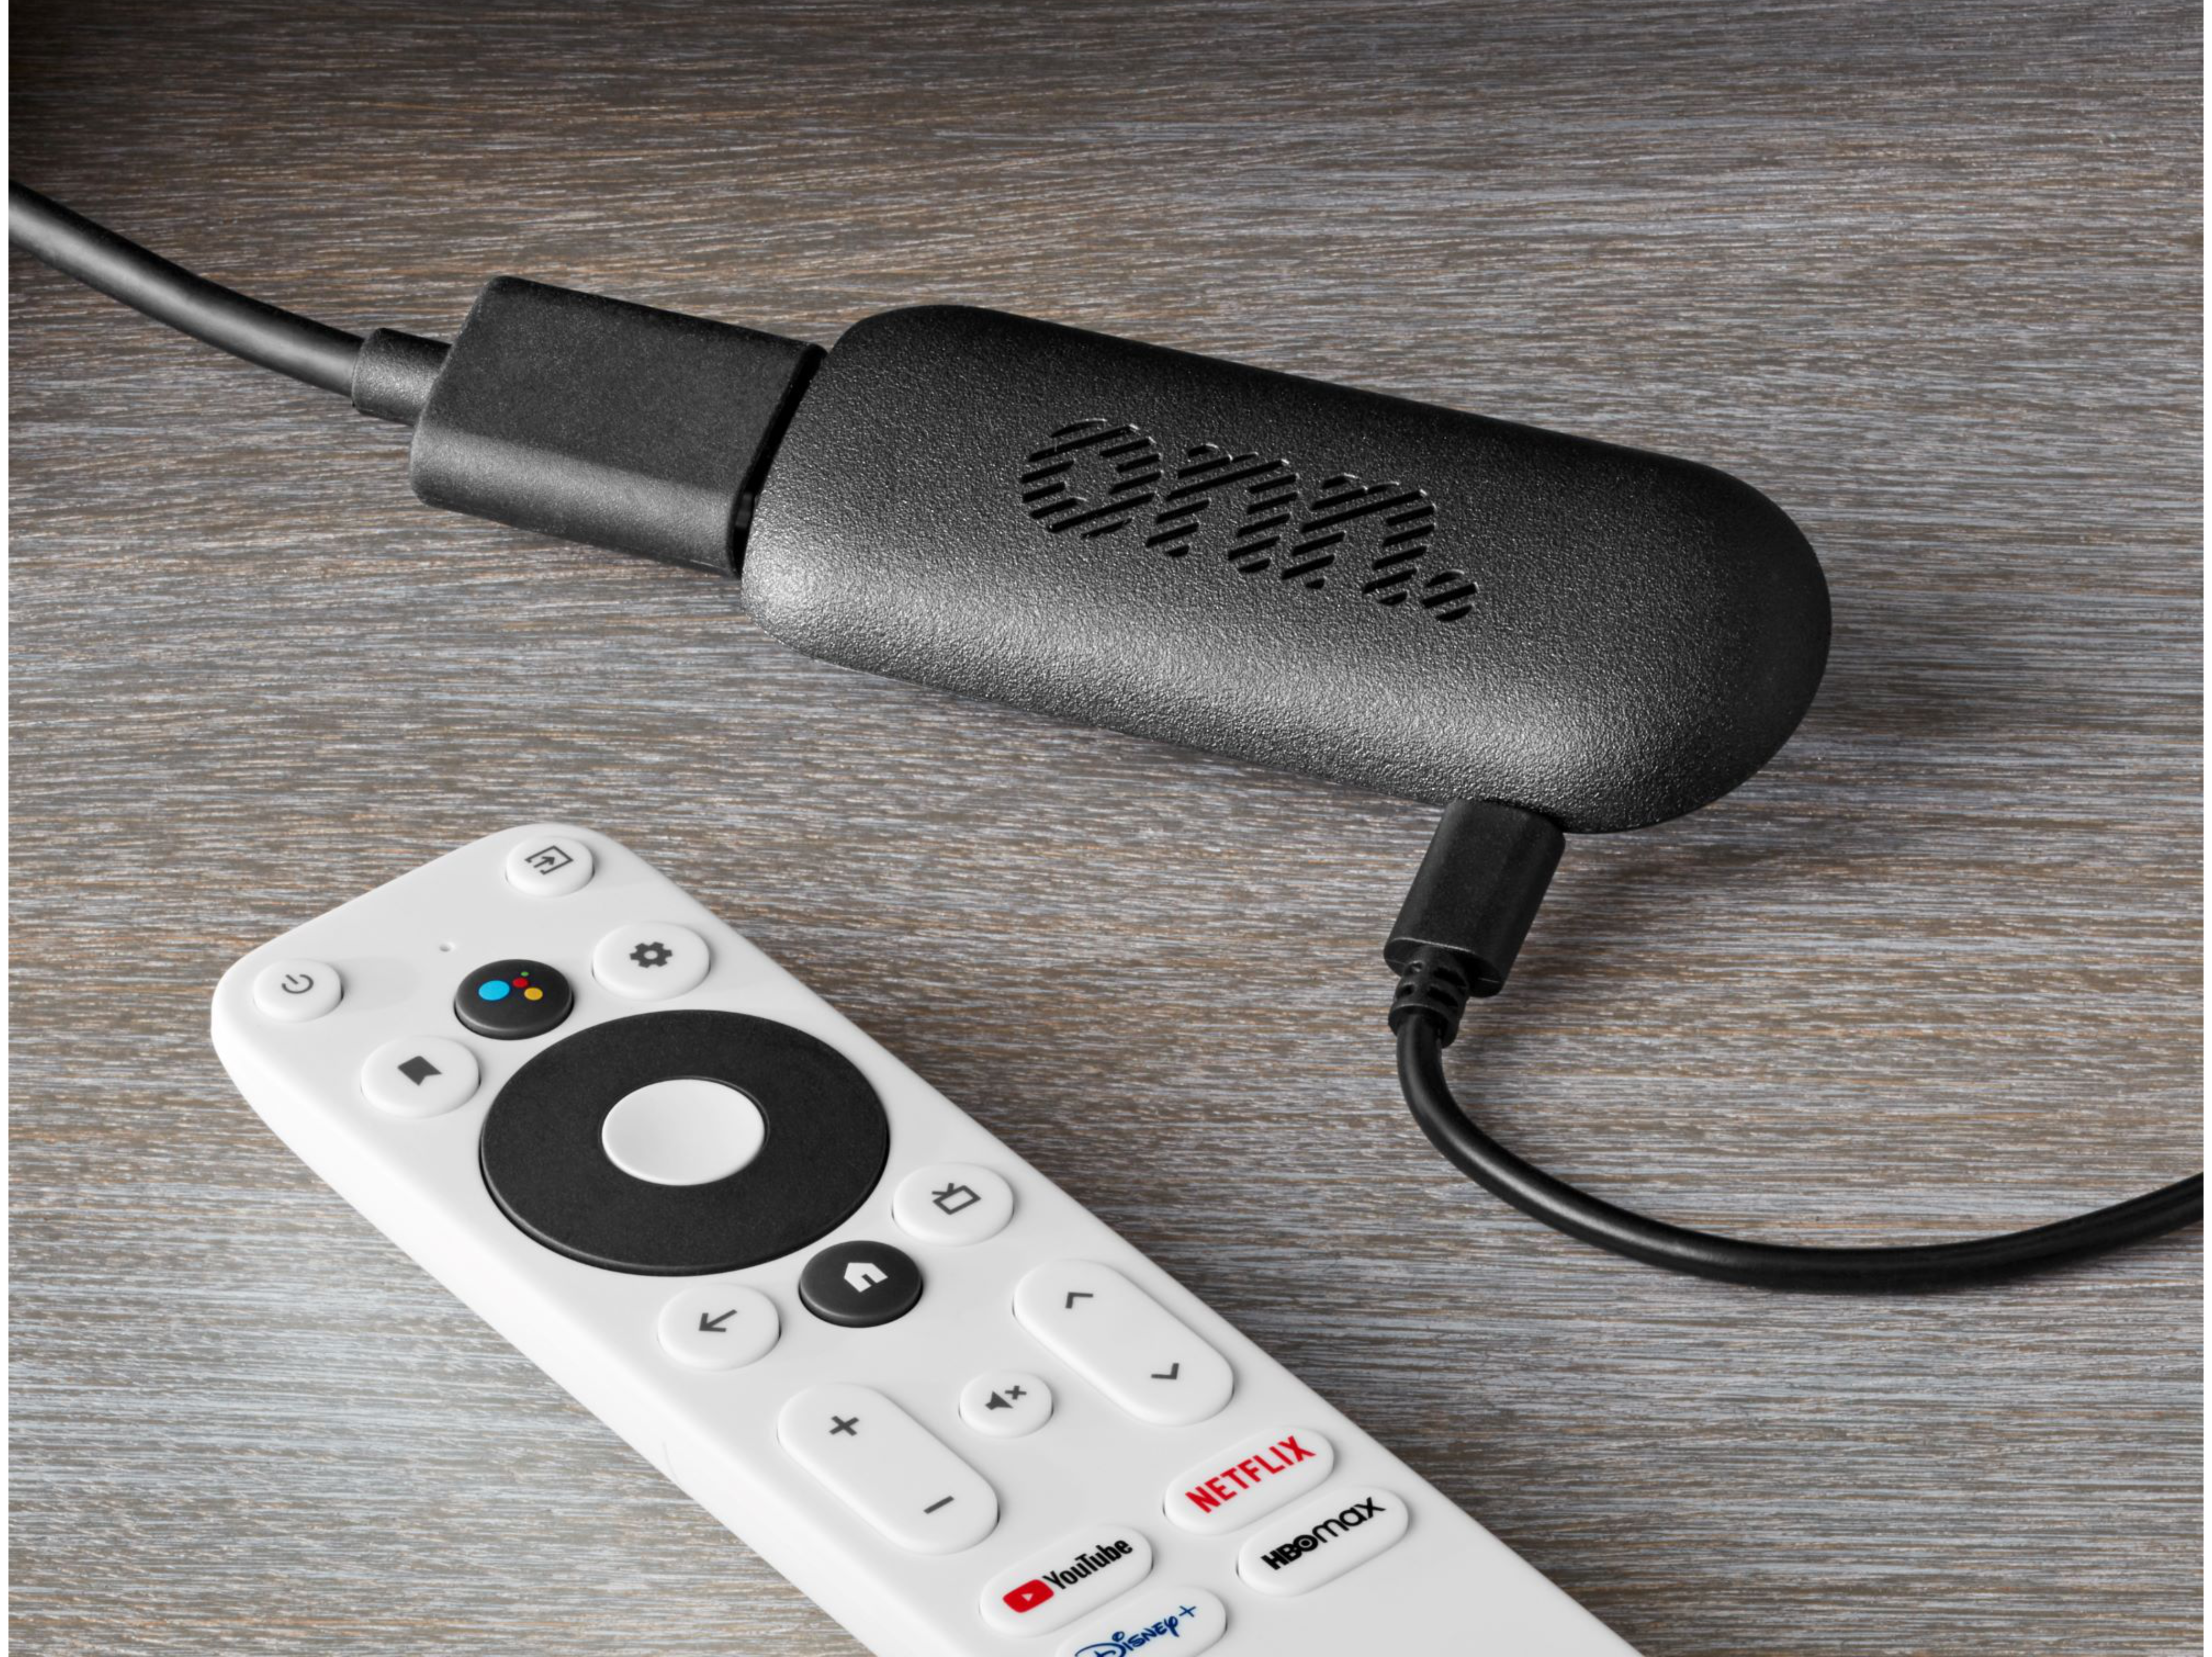 Get Walmart’s ultra-affordable Onn. FHD TV stick and 4K Android TV Box here today